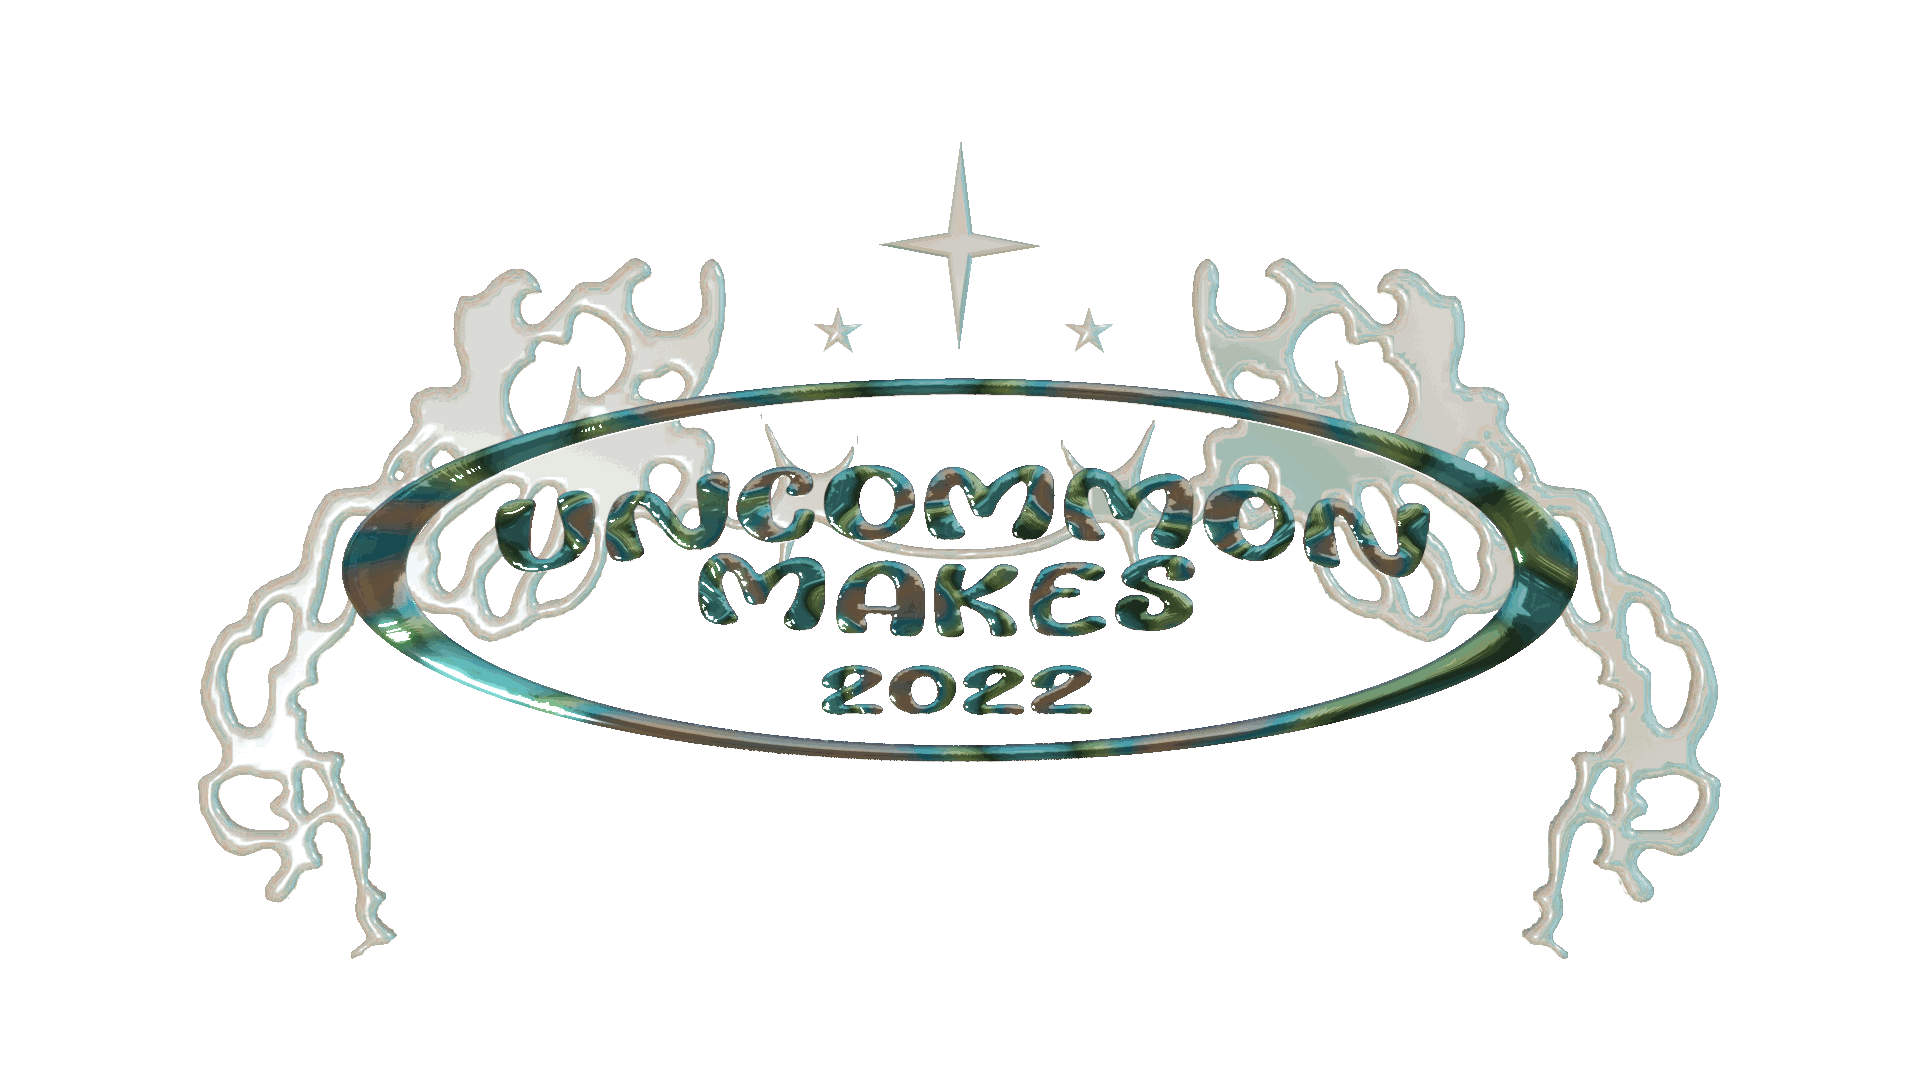 Uncommon Makes held November 5, 2022 in the 3rd floor of Crerar library. $450 in prizes!